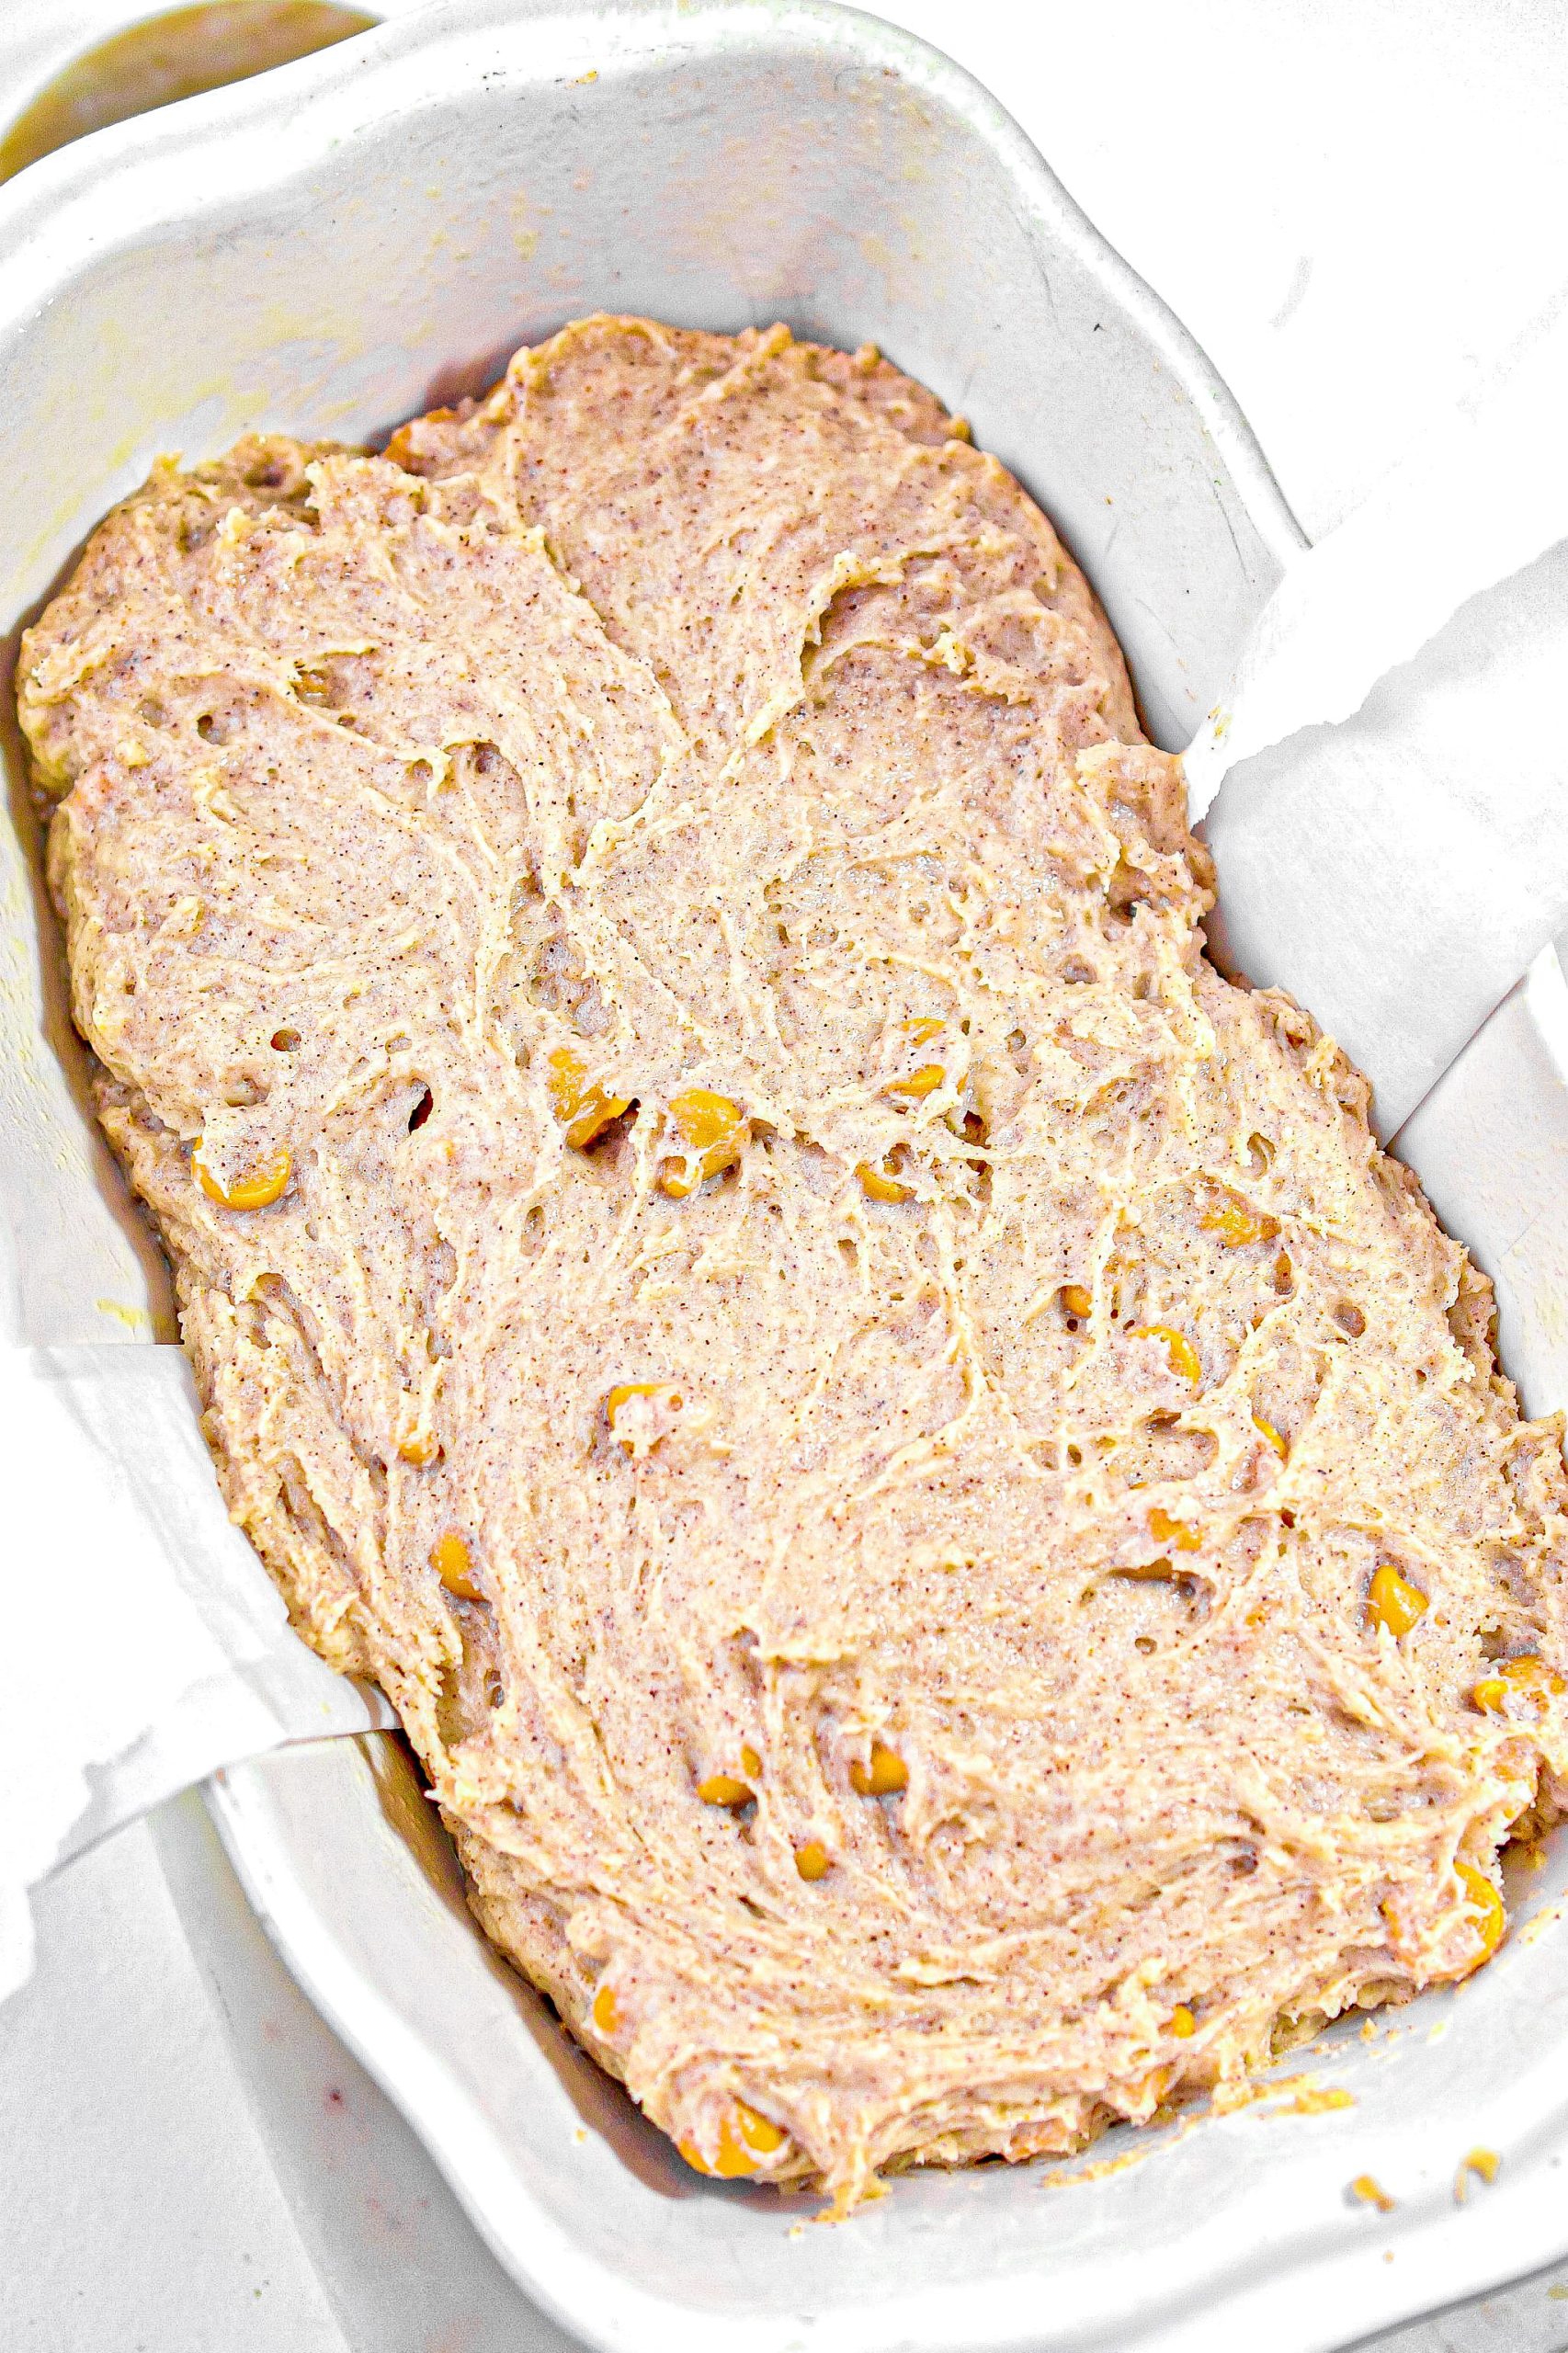 Spread the batter in an even layer in a well-greased loaf pan.